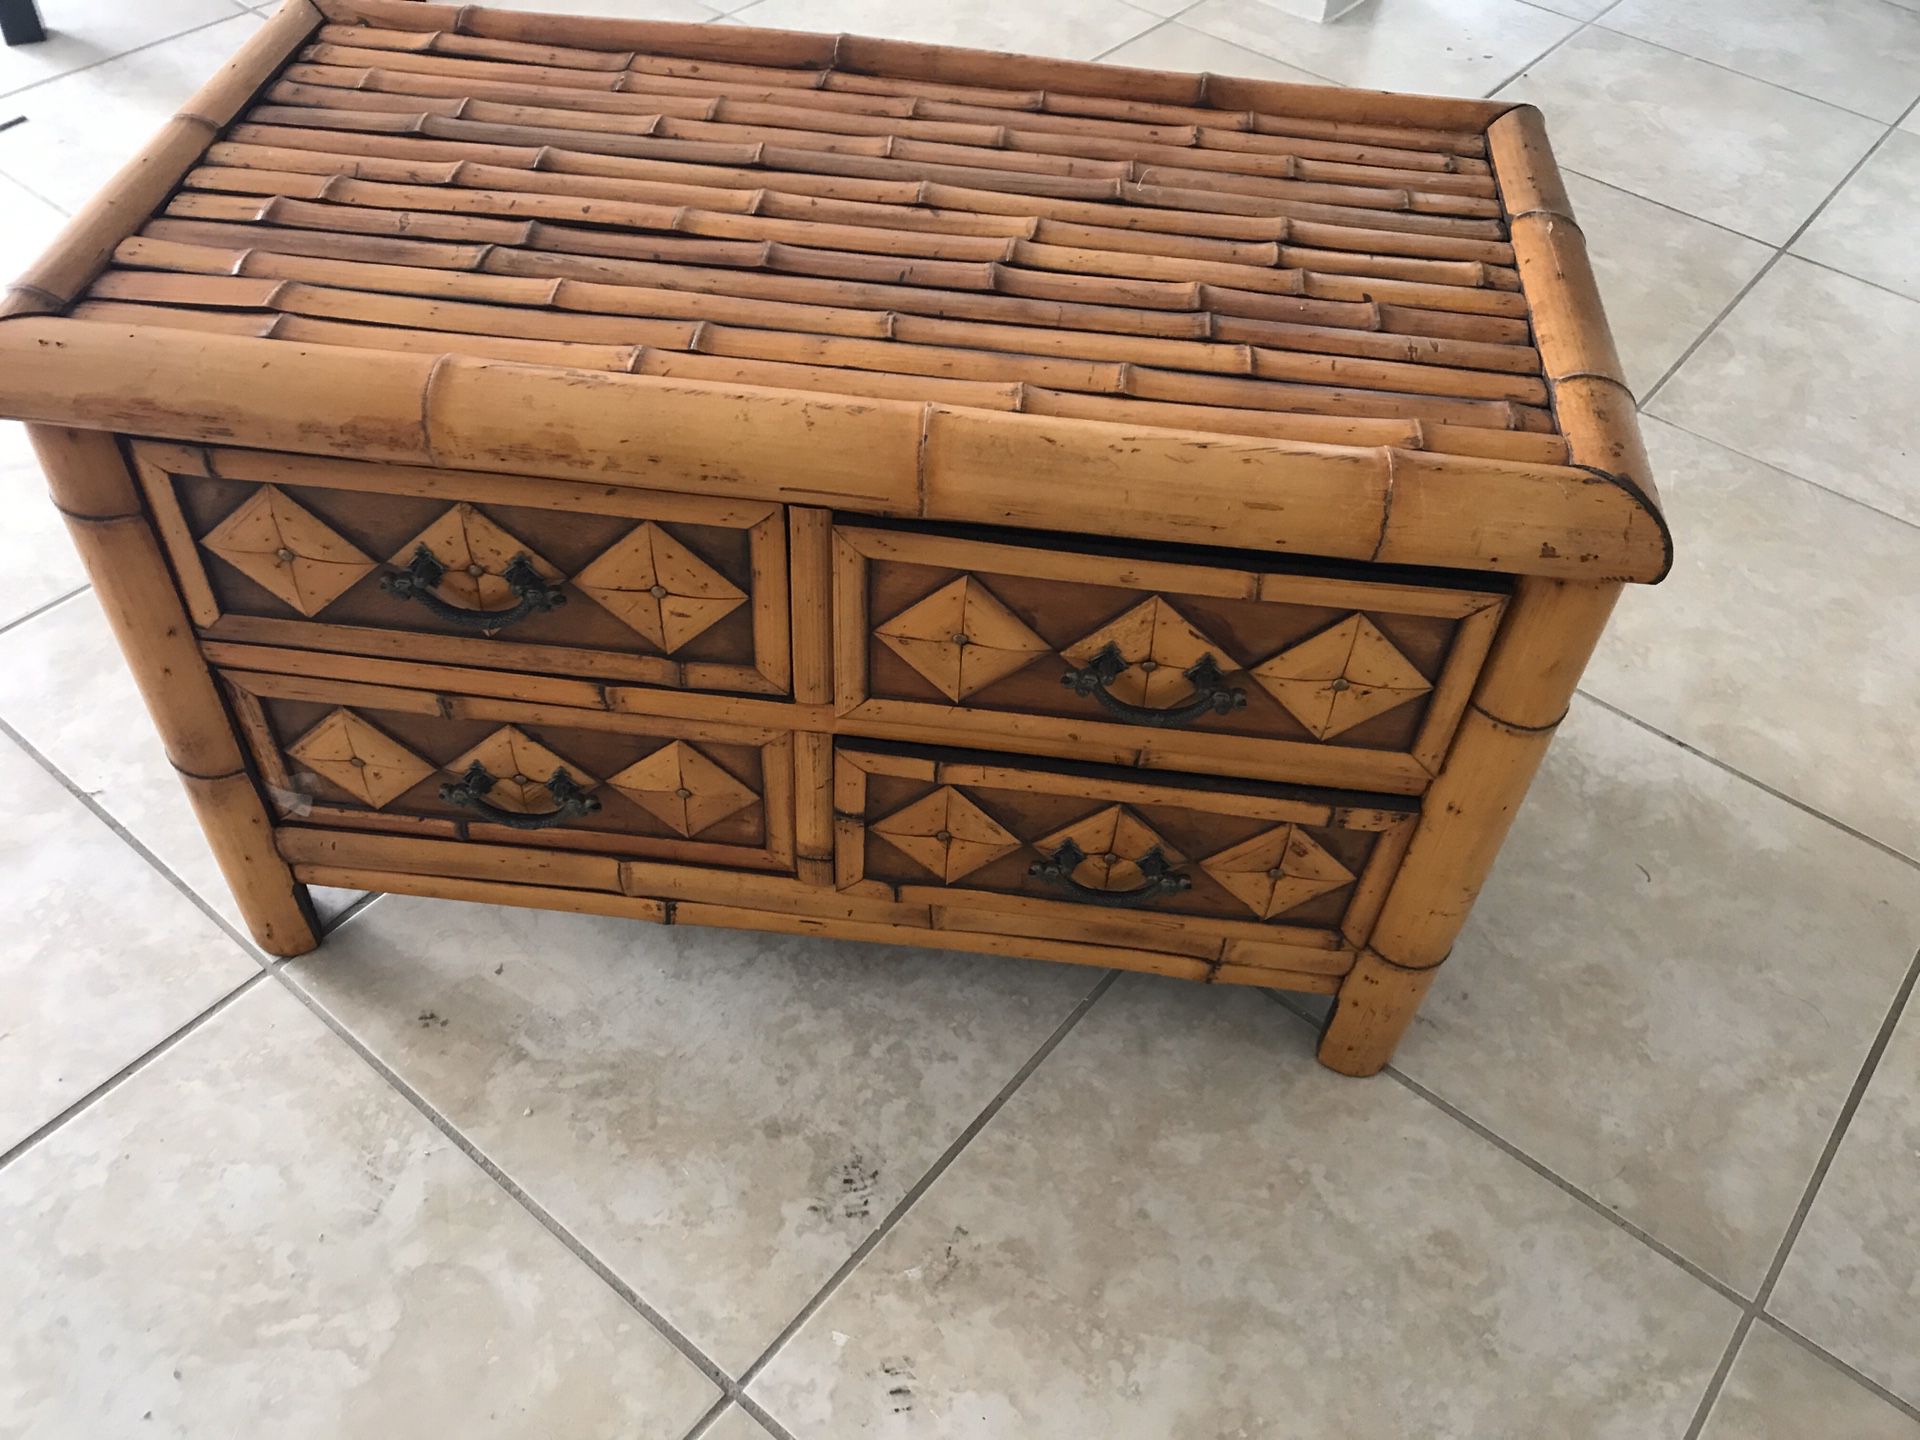 Bamboo table/chest with drawers